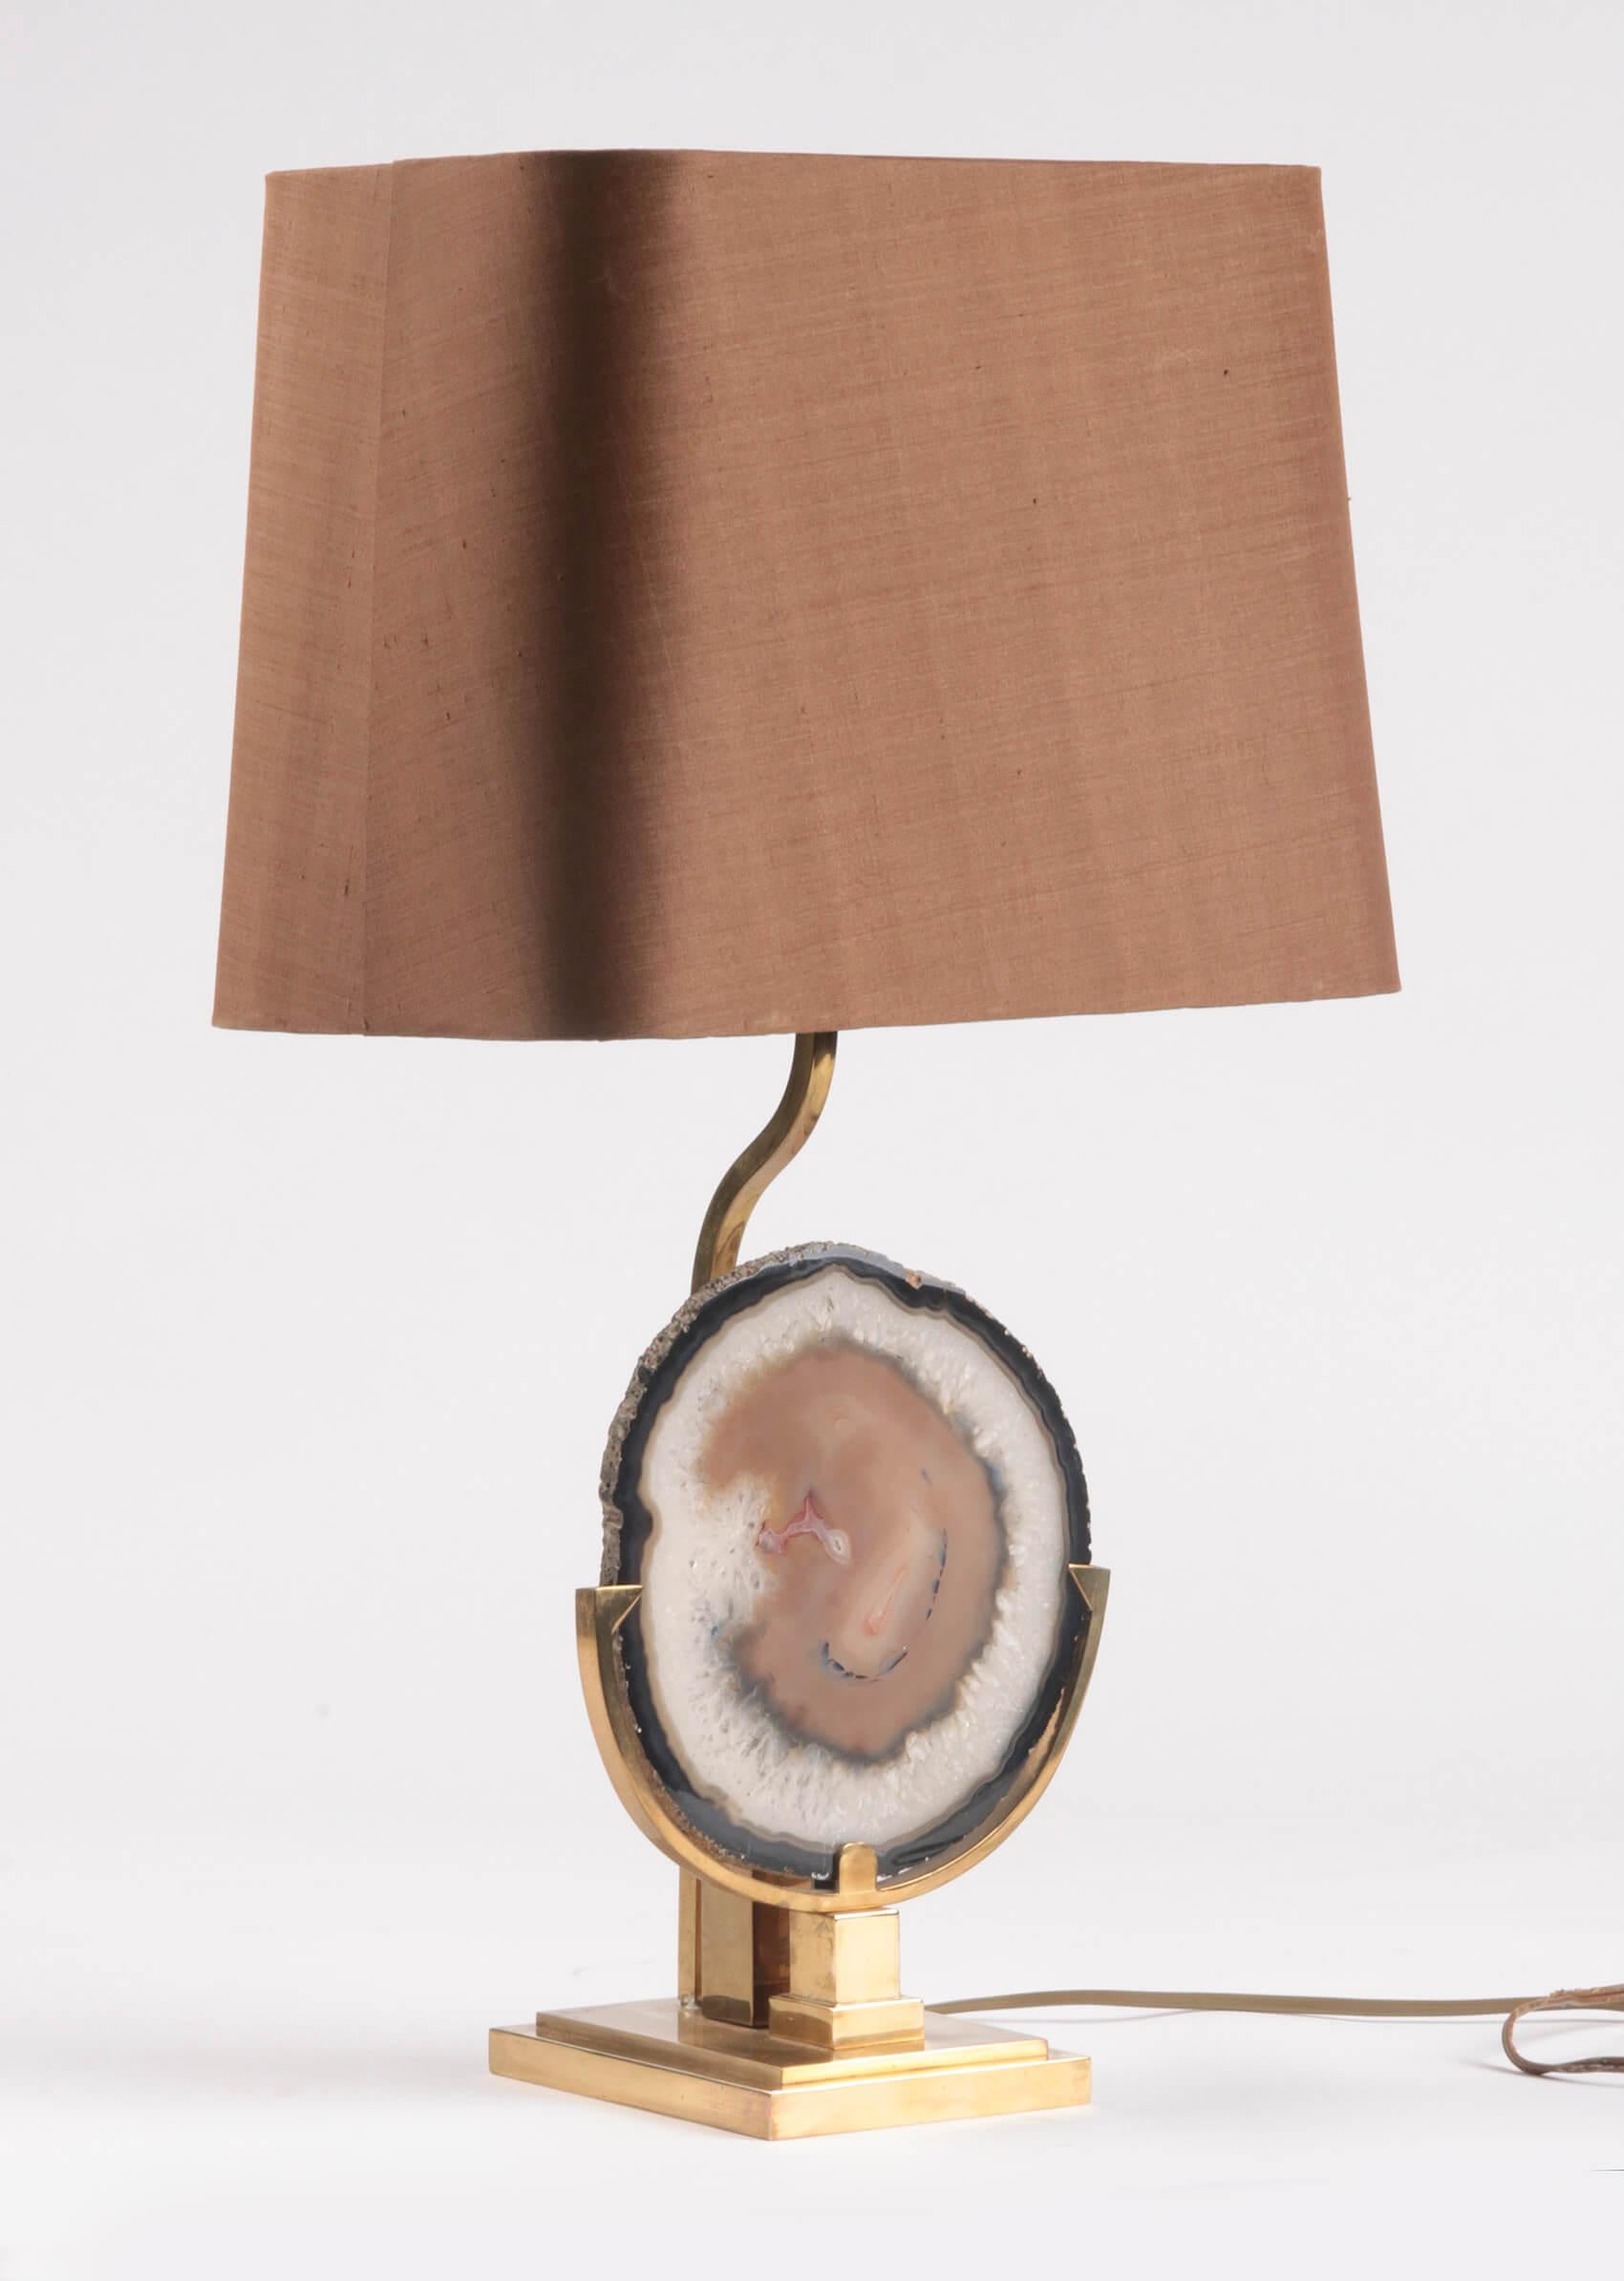 20th Century Mid-Century Modern Table Lamp with Agate Attributed to Willy Daro